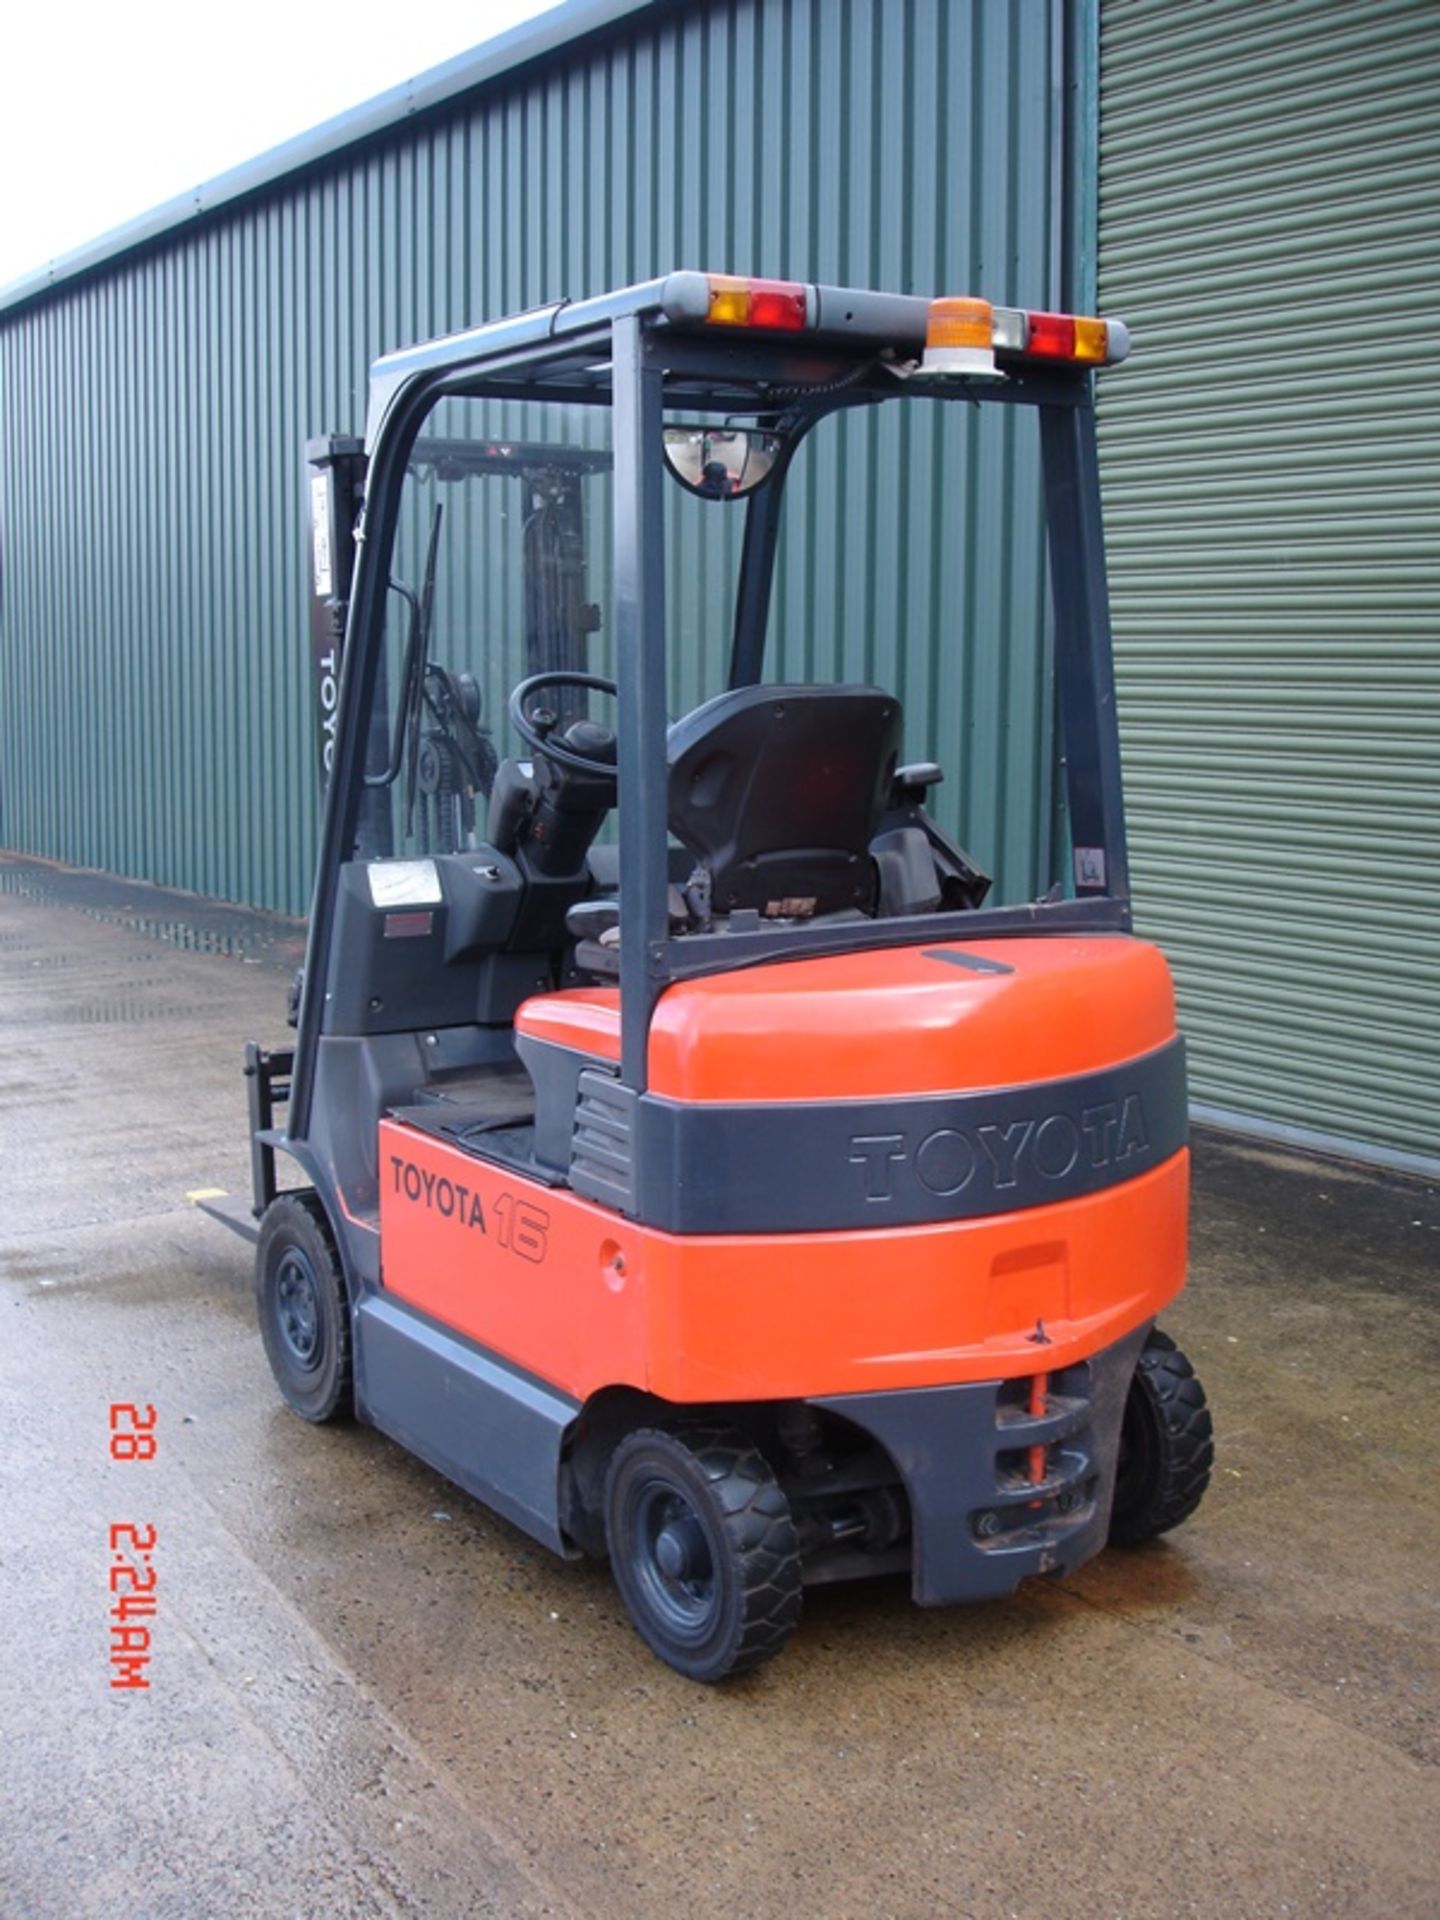 TOYOTA 1.6 TON ELECTRIC FORKLIFT - Image 2 of 7